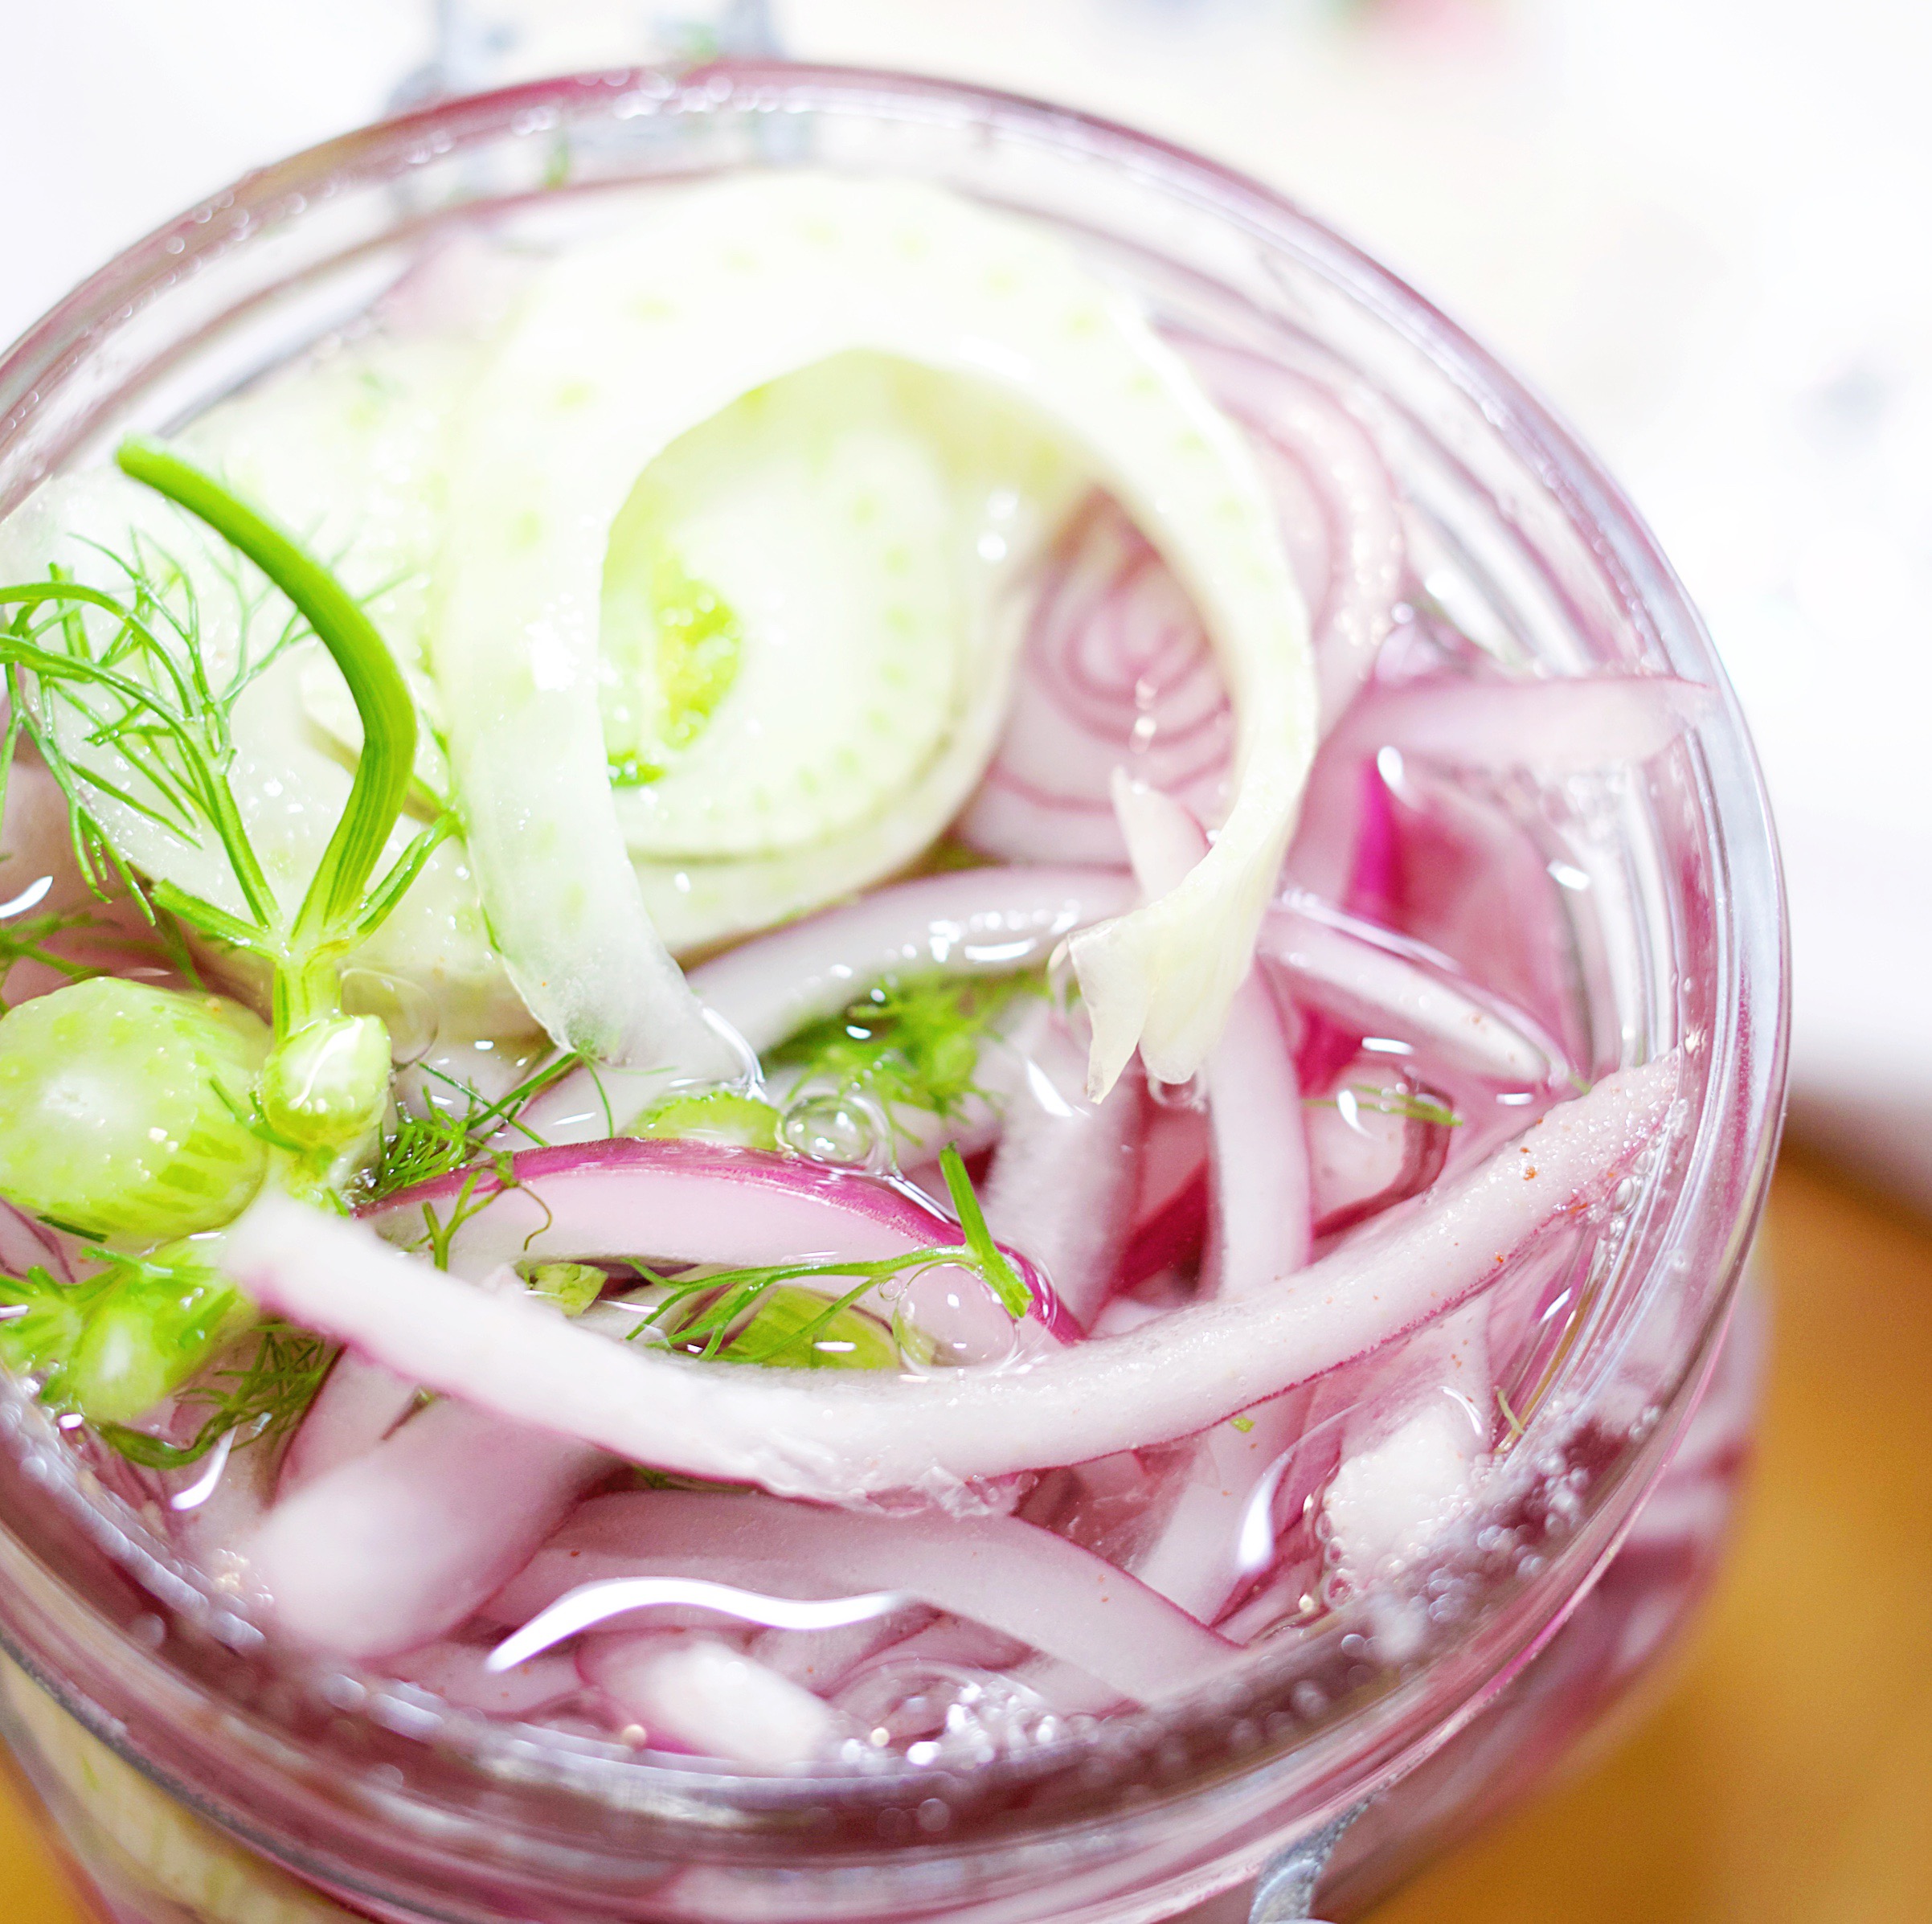 Pickled Groovy Green Fennel + Pretty Purple Onions